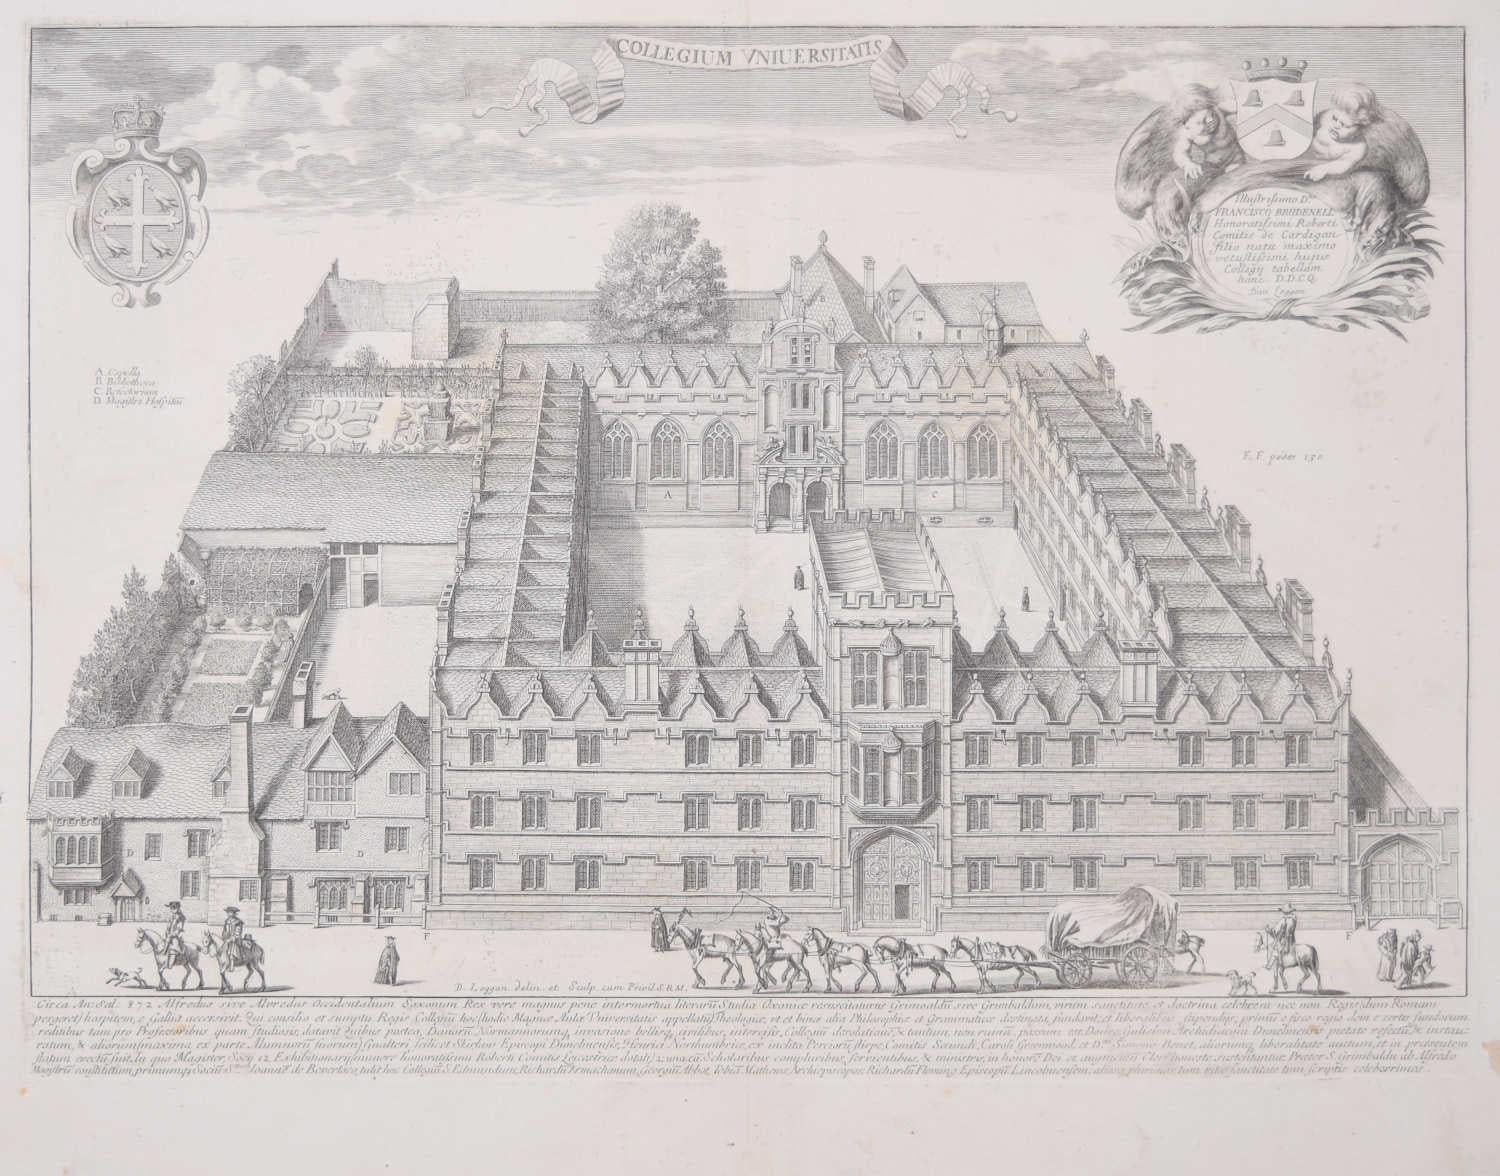 David Loggan (1634-1692)
Engraving of University College, Oxford
Engraving, 1674
30 x 40cm

To see our other views of Oxford and Cambridge, scroll down to "More from this Seller" and below it click on "See all from this Seller" - or send us a